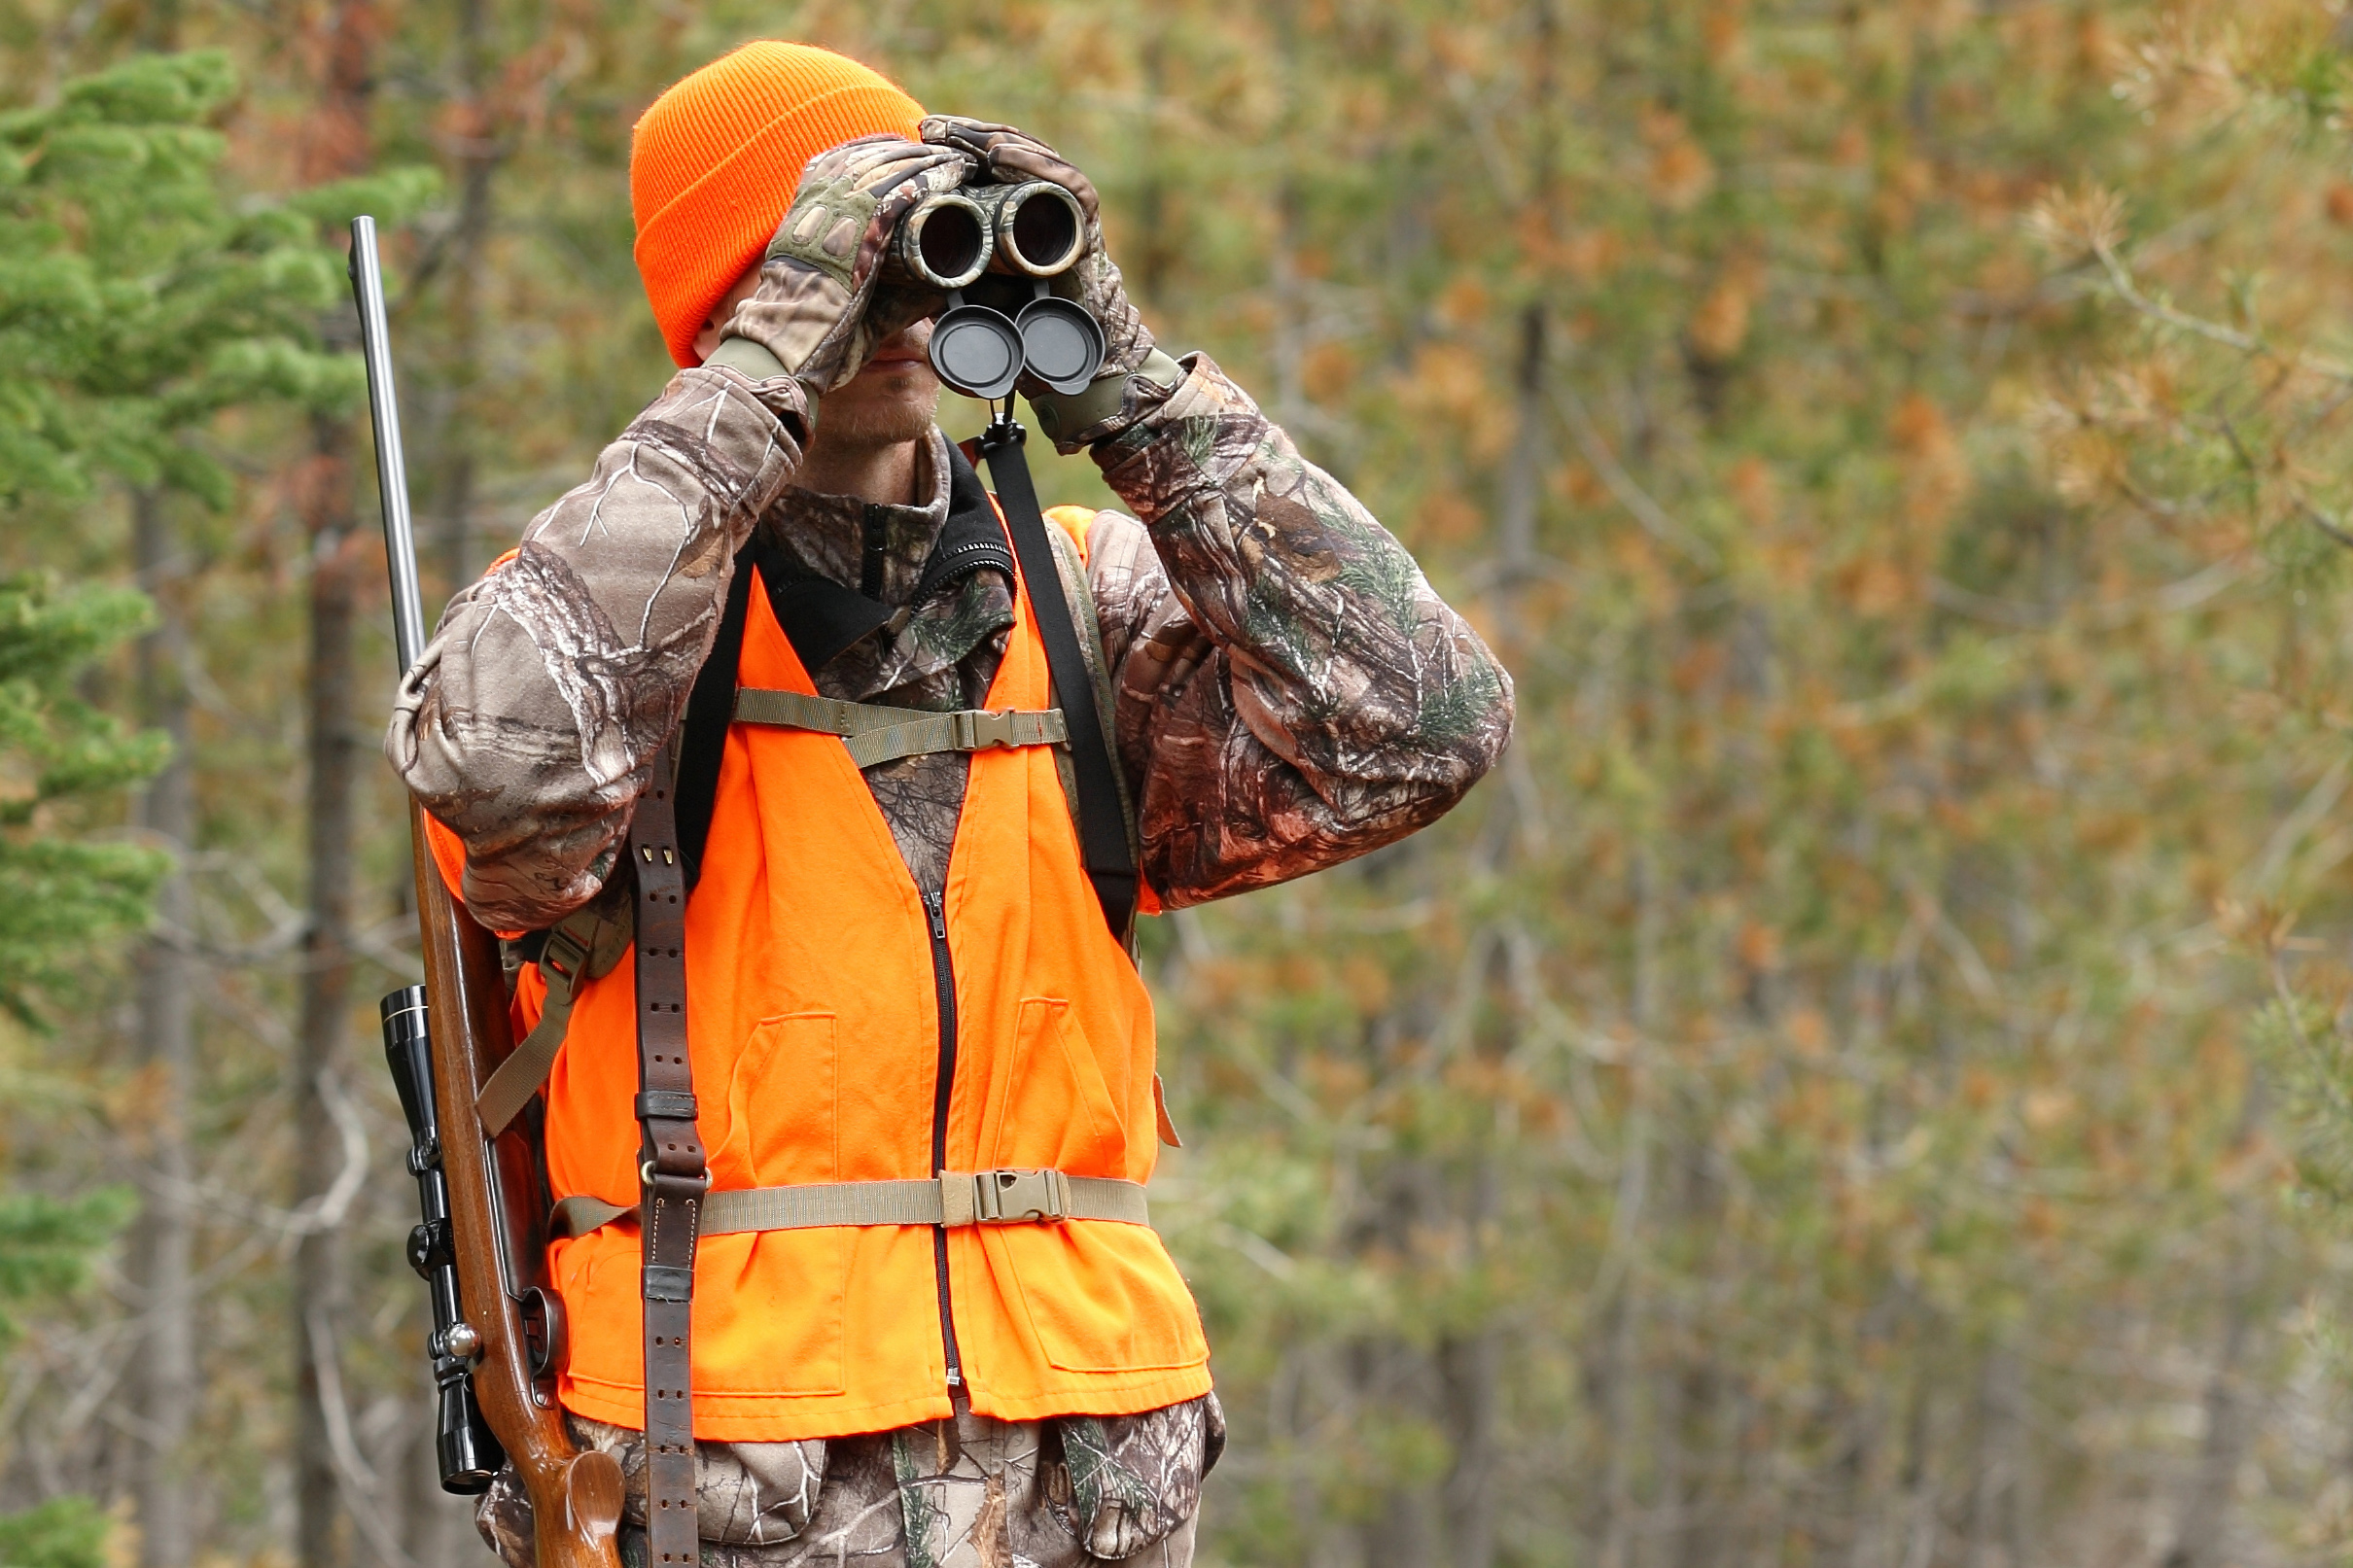 Image of Safety during hunting season